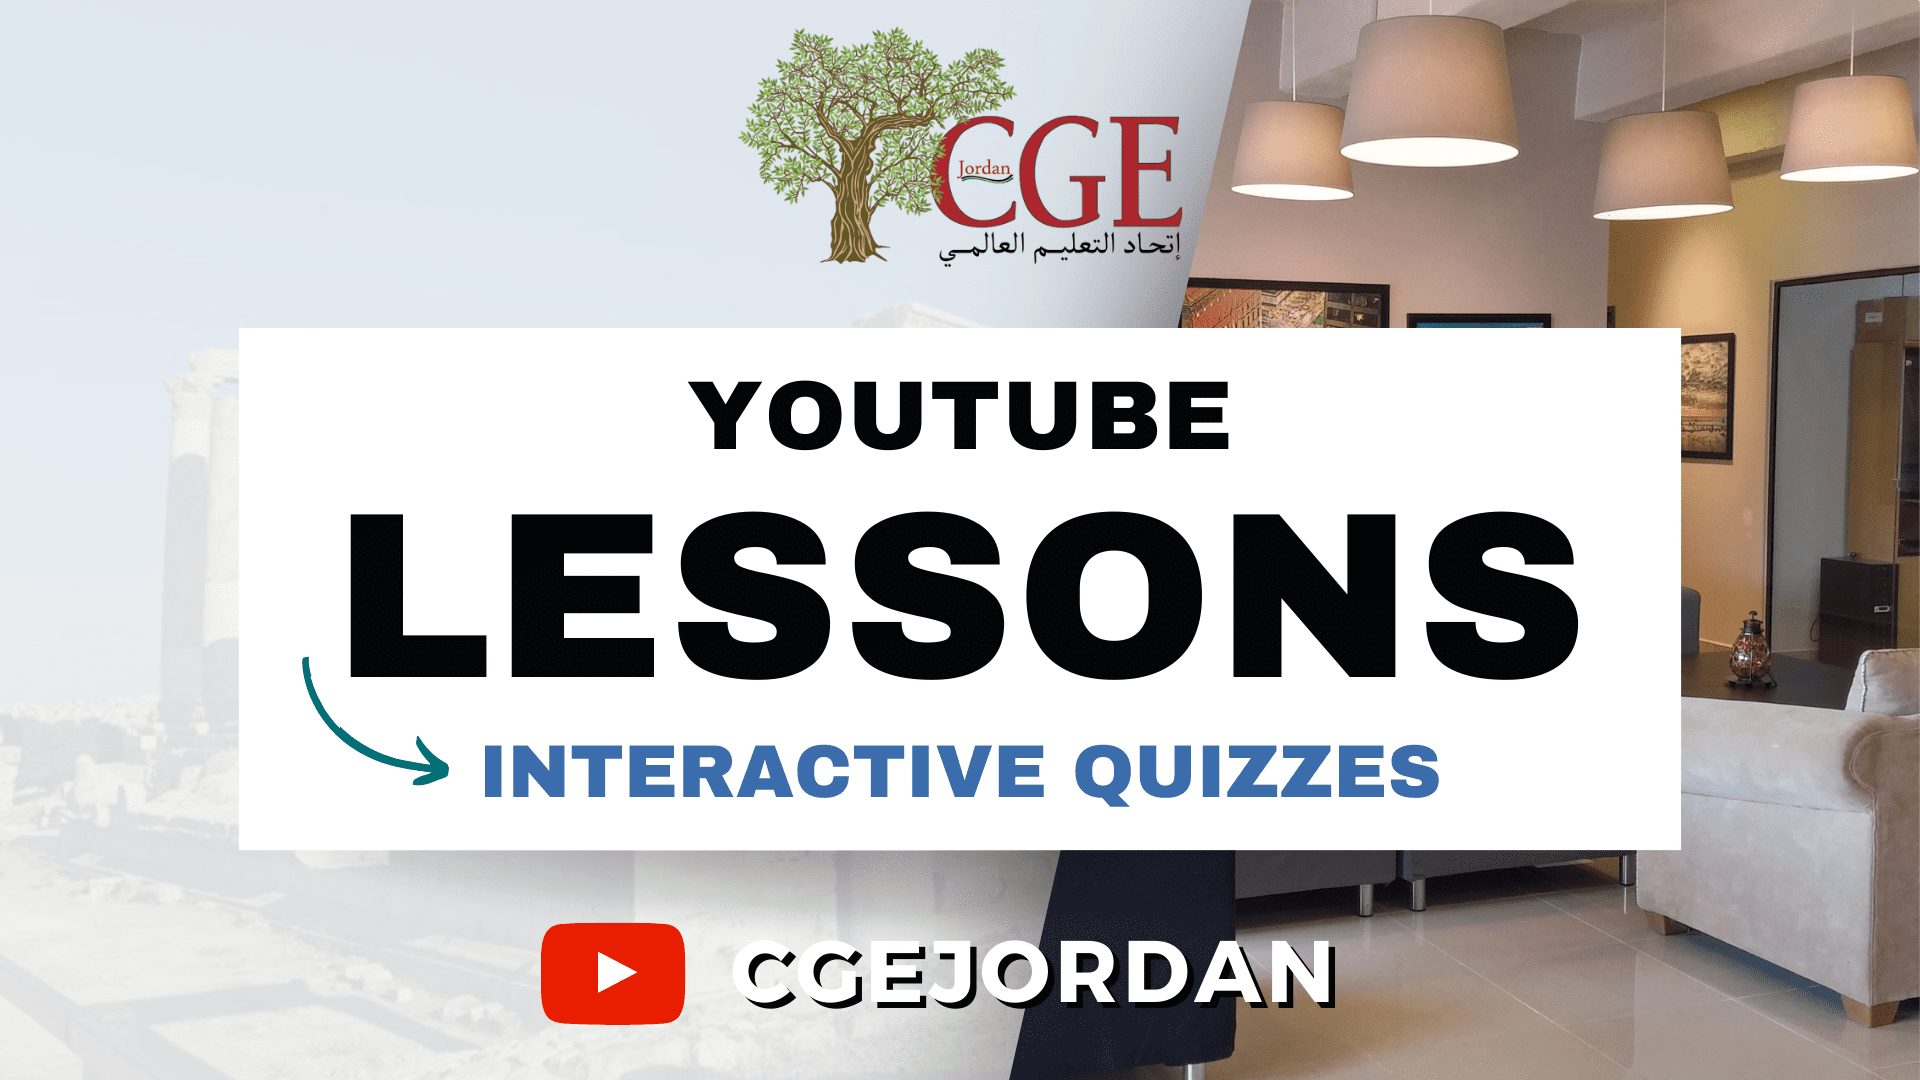 CGE YOUTUBE LESSONS COURSE